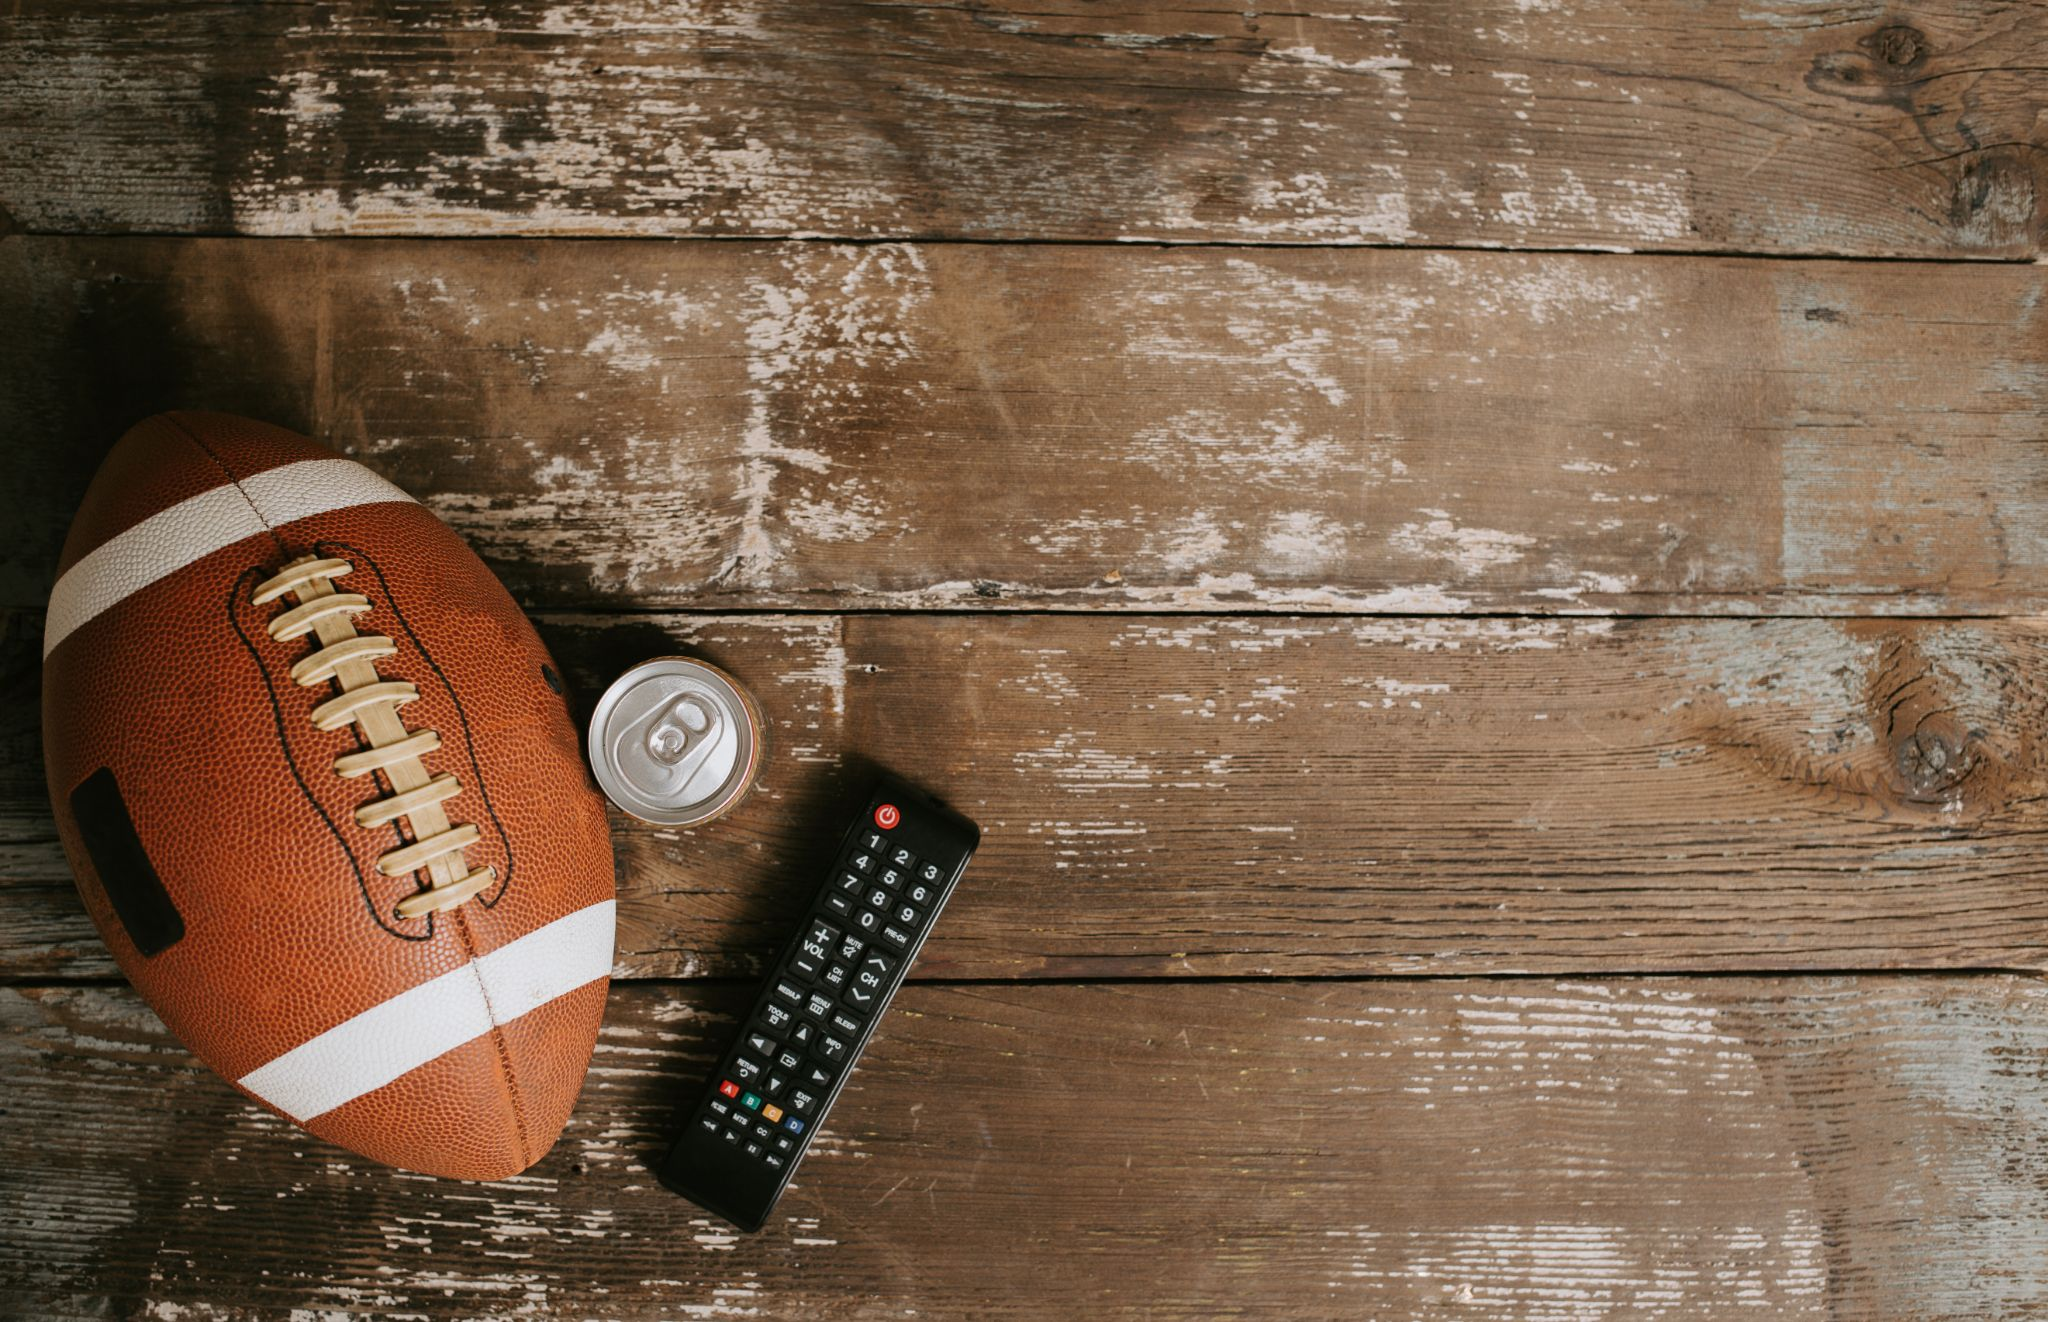 A football on a wooden table with a remote